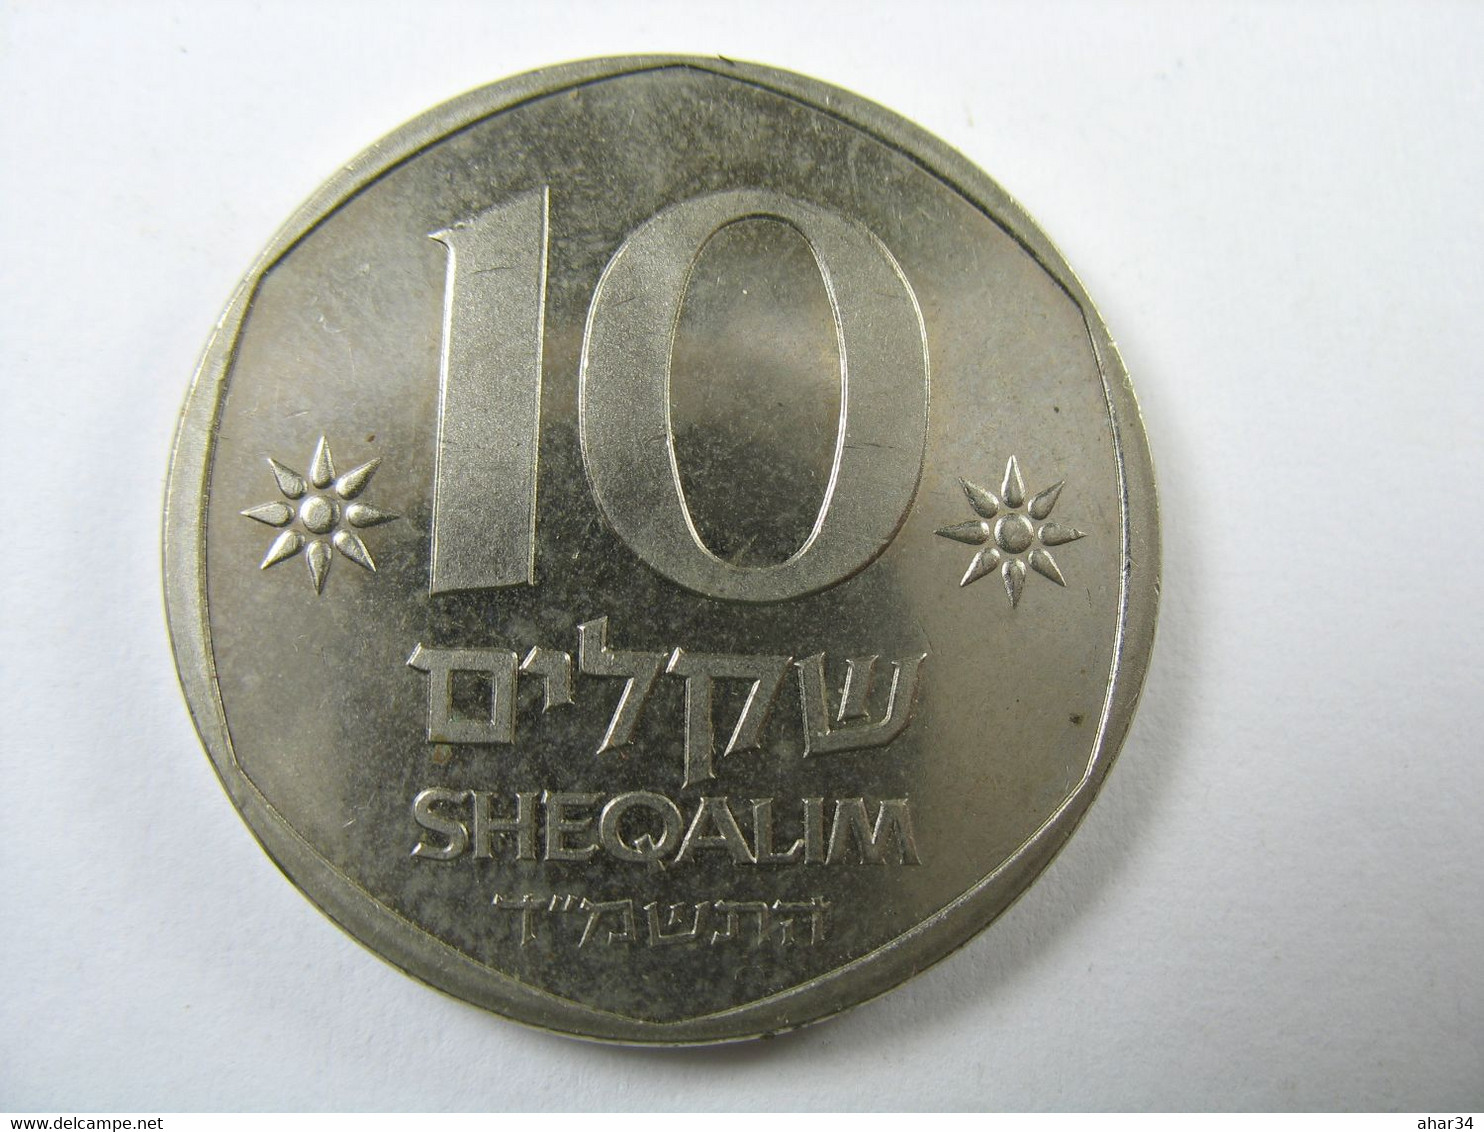 TEMPLATE LISTING ISRAEL  LOT OF  25  COINS 10 SHEQALIM HERTZEL  UNC   1984  COIN . - Other - Asia